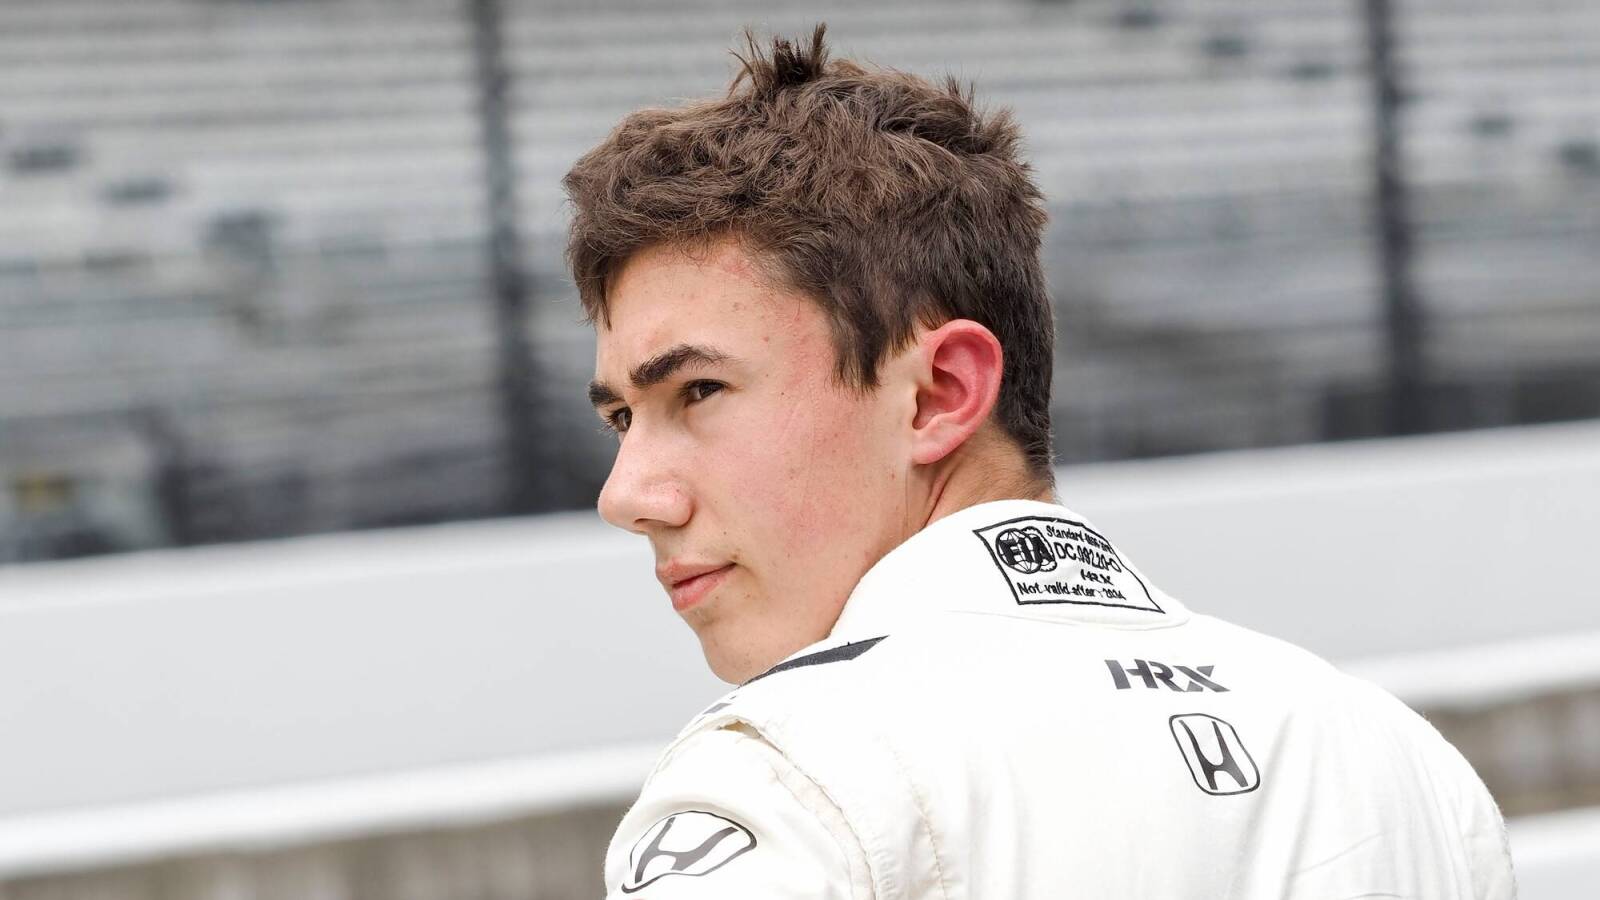 How talented teenager can bounce back after being bumped out of Indy 500